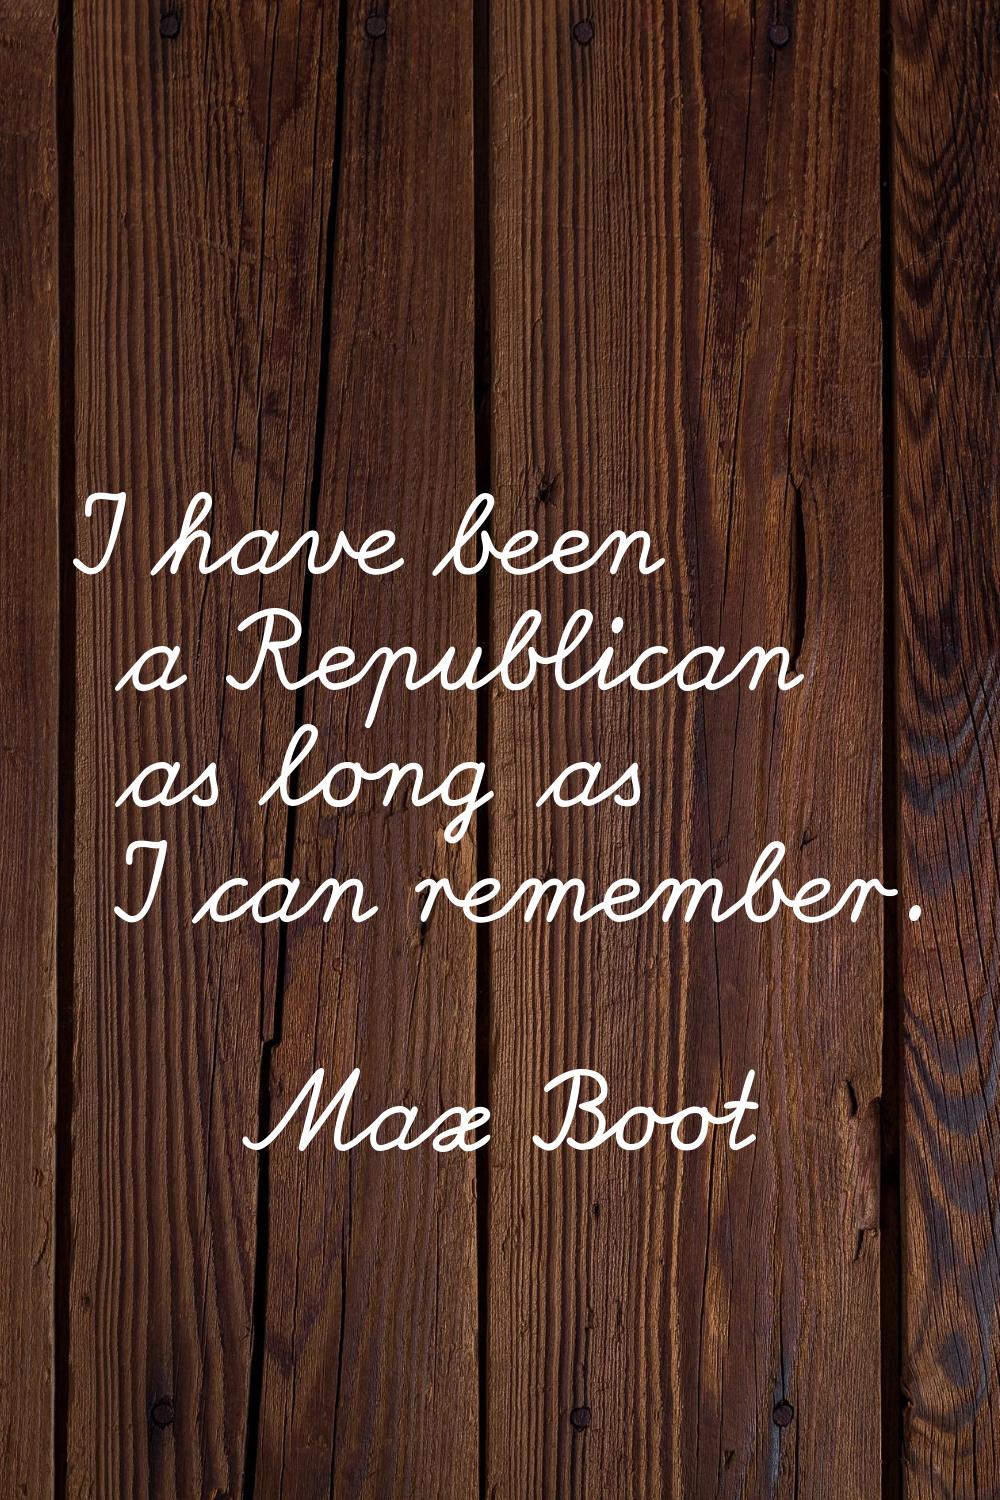 I have been a Republican as long as I can remember.